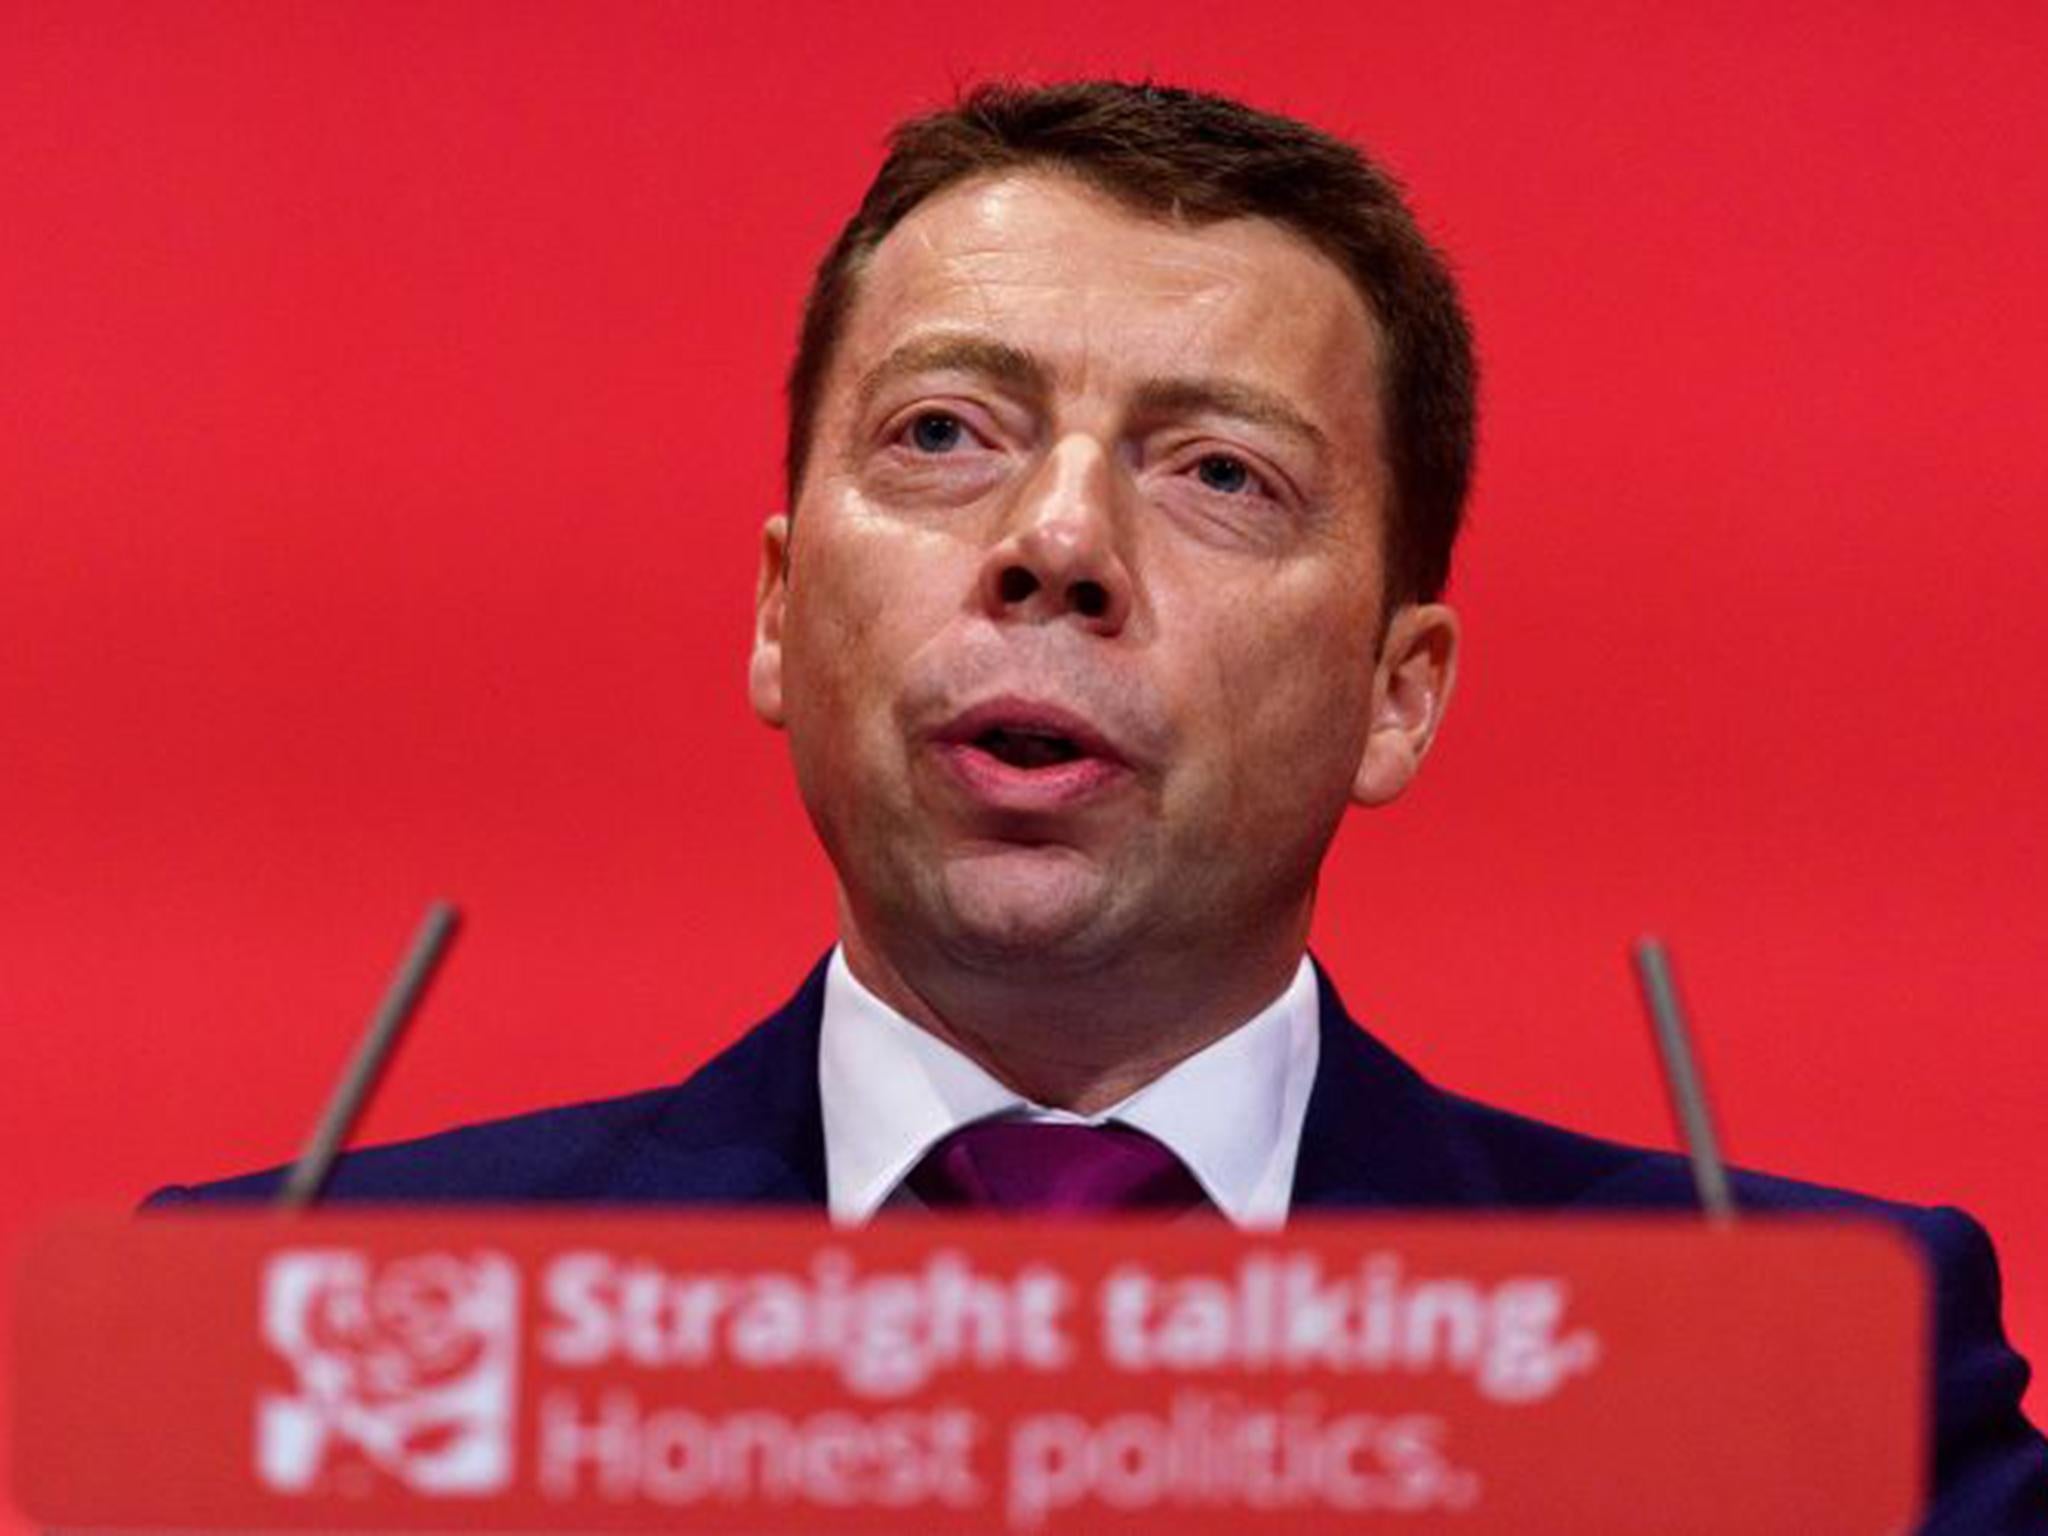 Iain McNicol fell out with Jeremy Corbyn supporters during the party's 2016 leadership contest